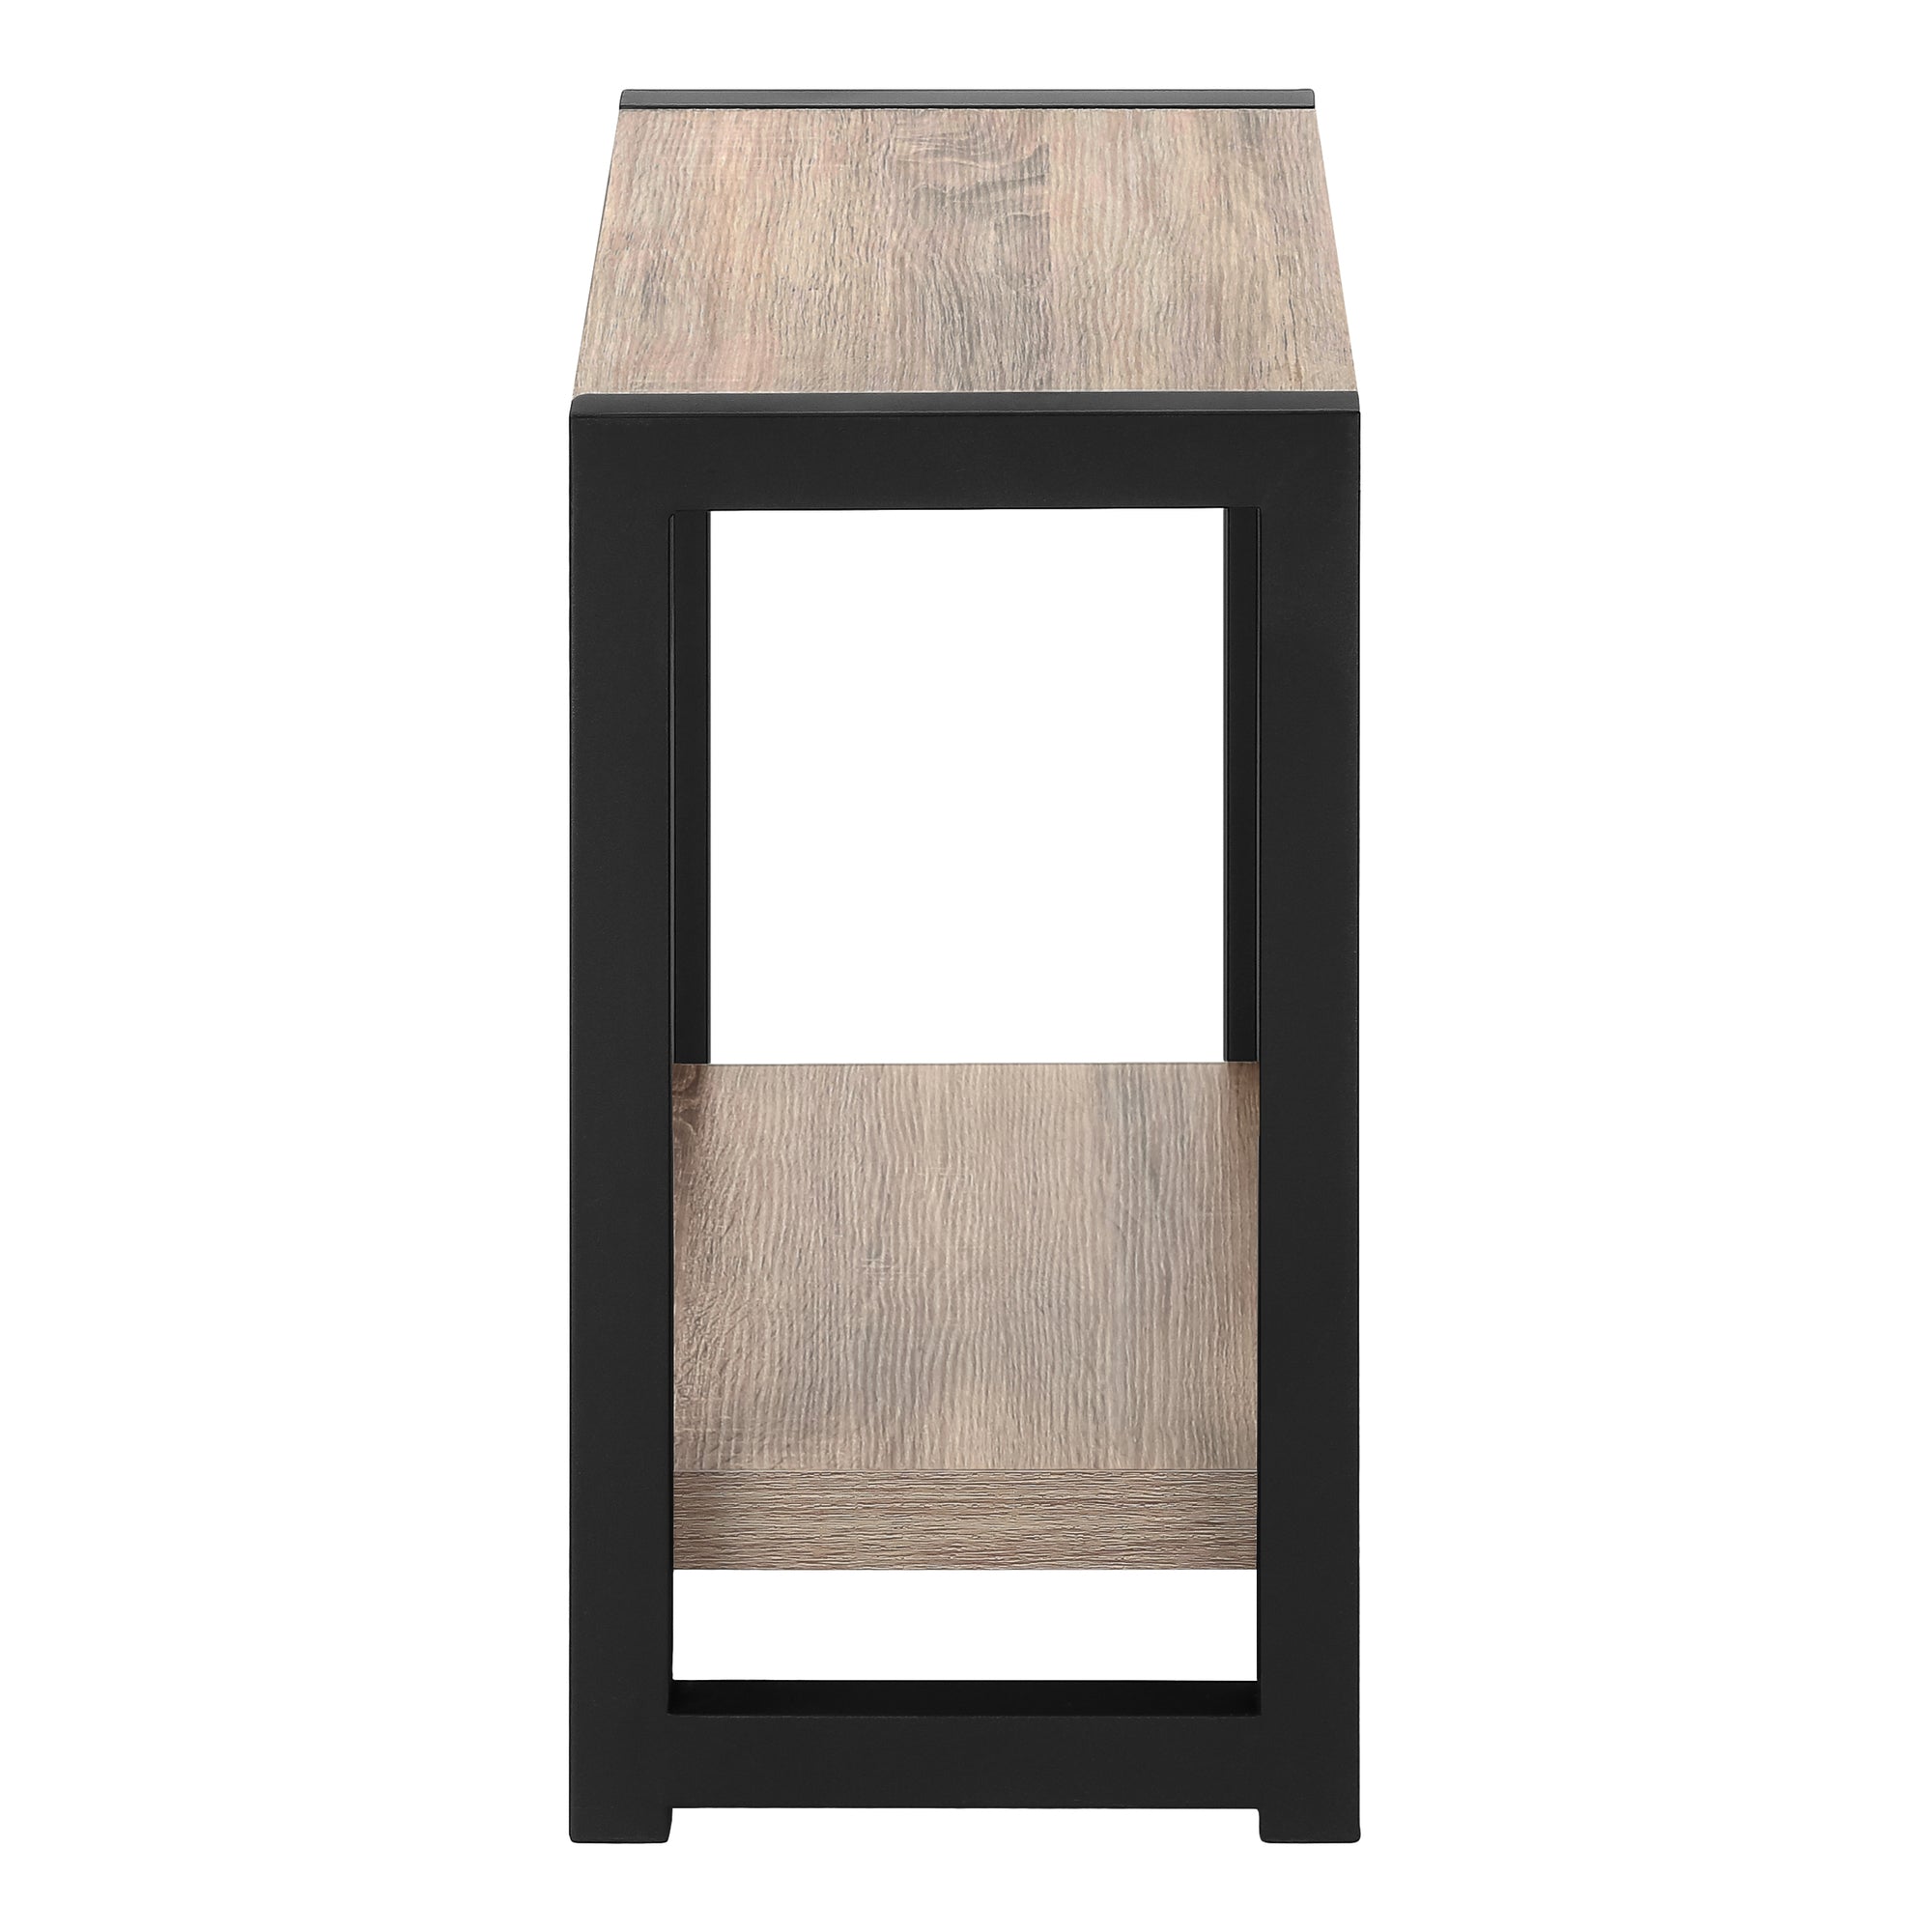 MN-892083    Accent Table, Side, End, Narrow, Small, Living Room, Bedroom, 2 Tier, Metal Legs, Laminate, Dark Taupe, Black, Contemporary, Modern